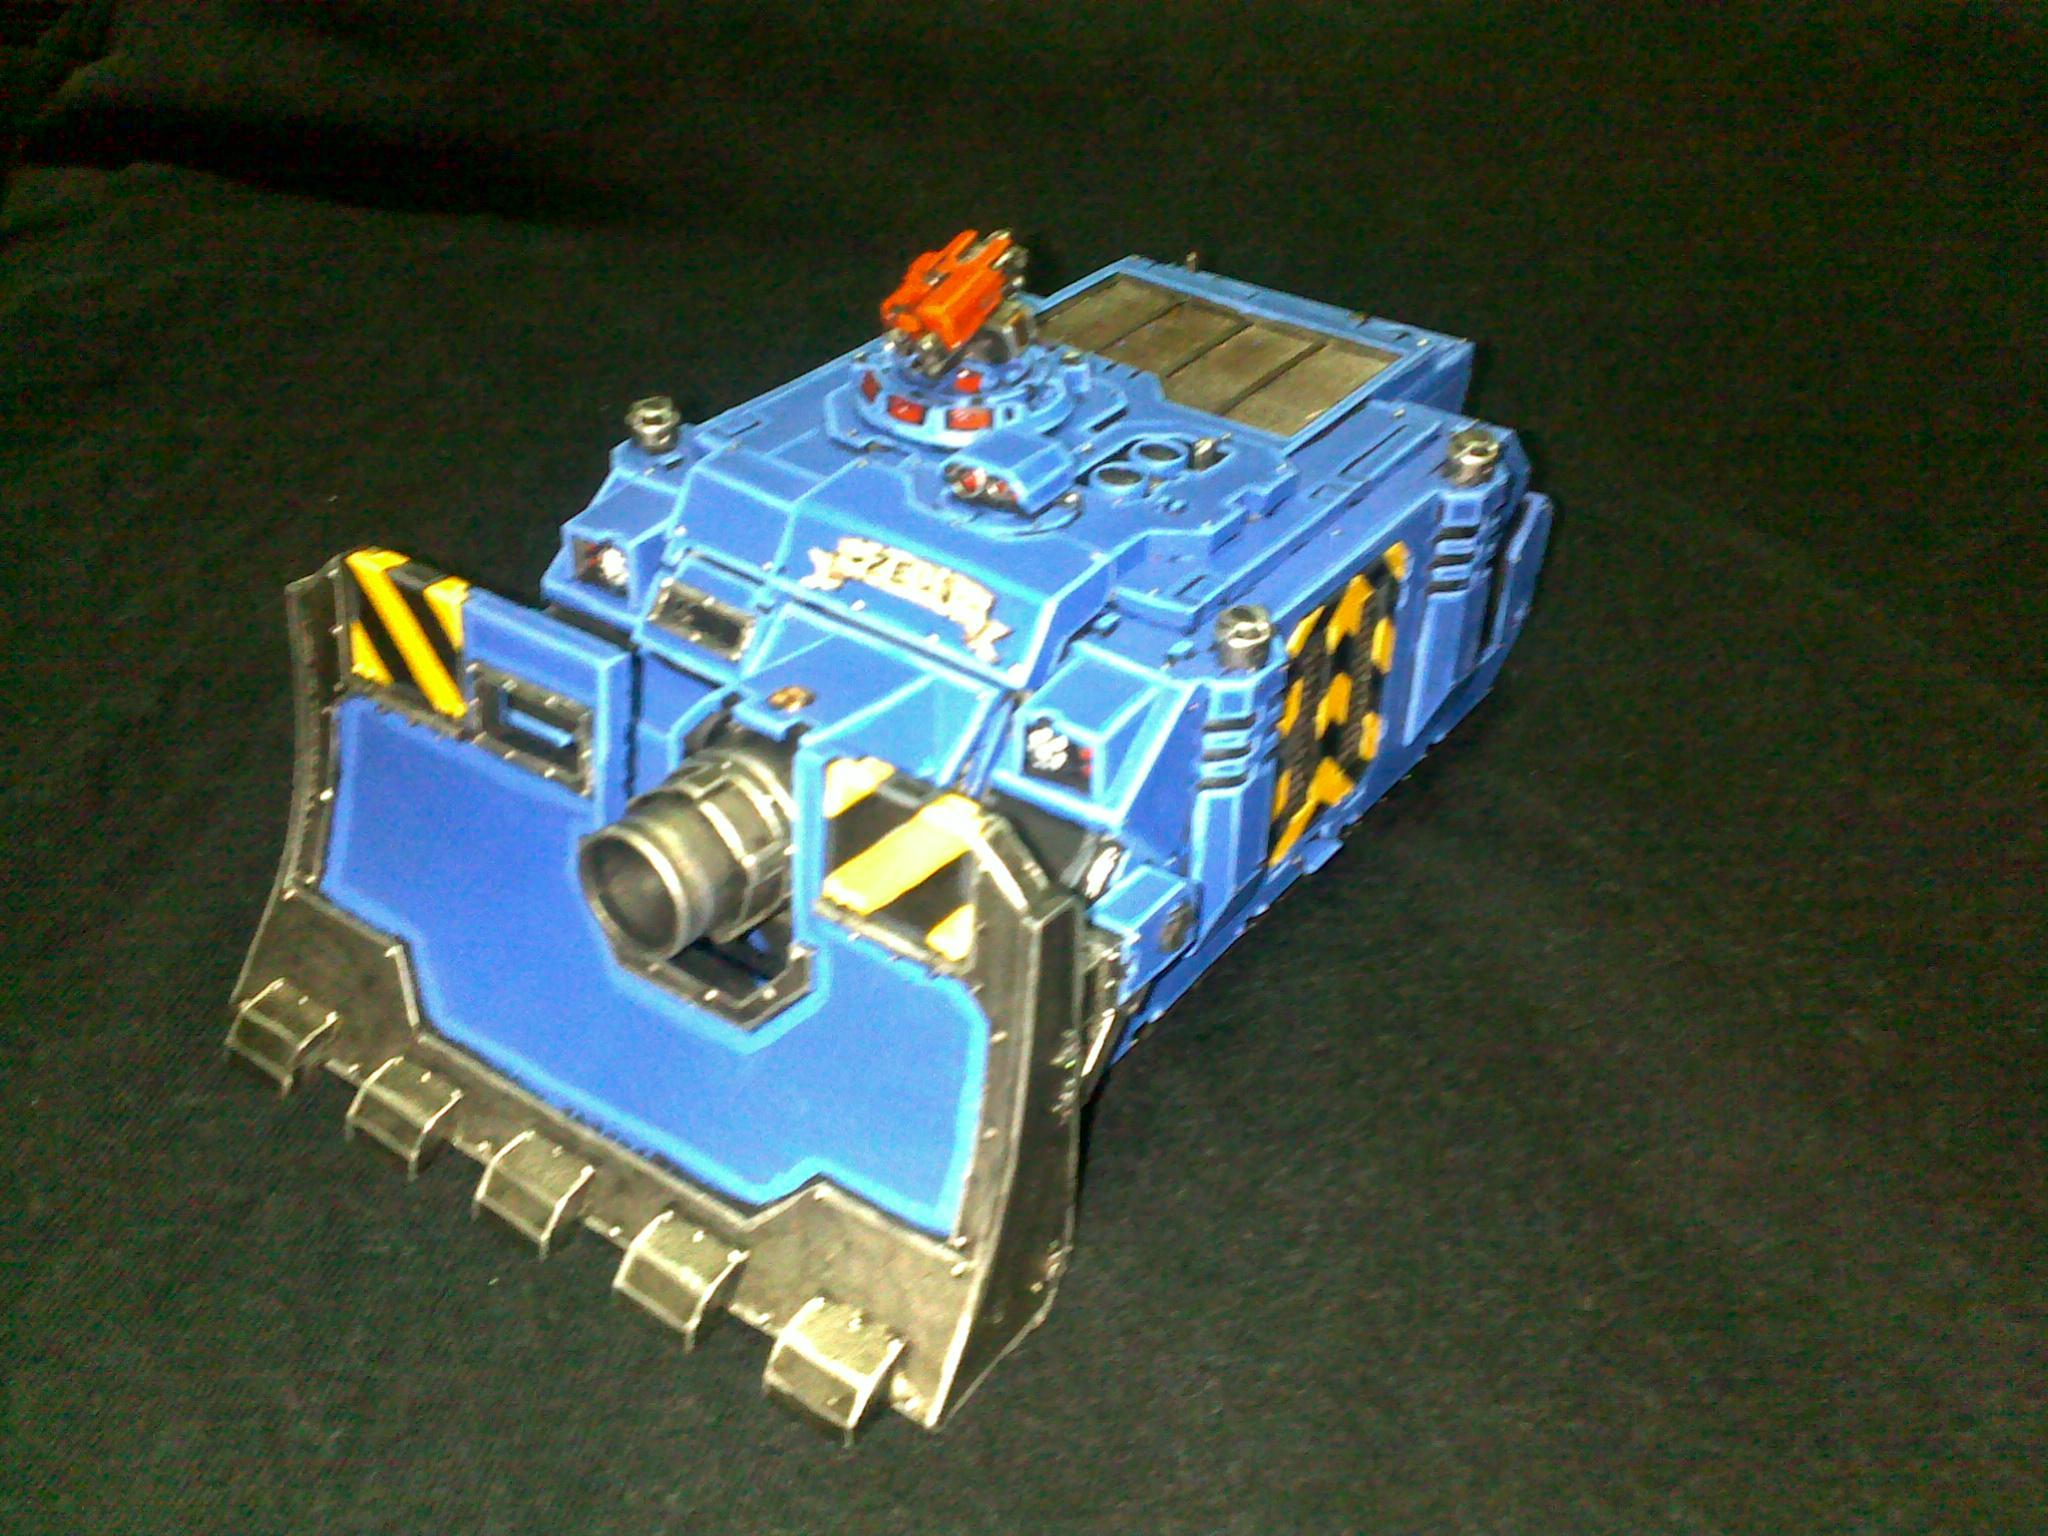 Front view of vindicator